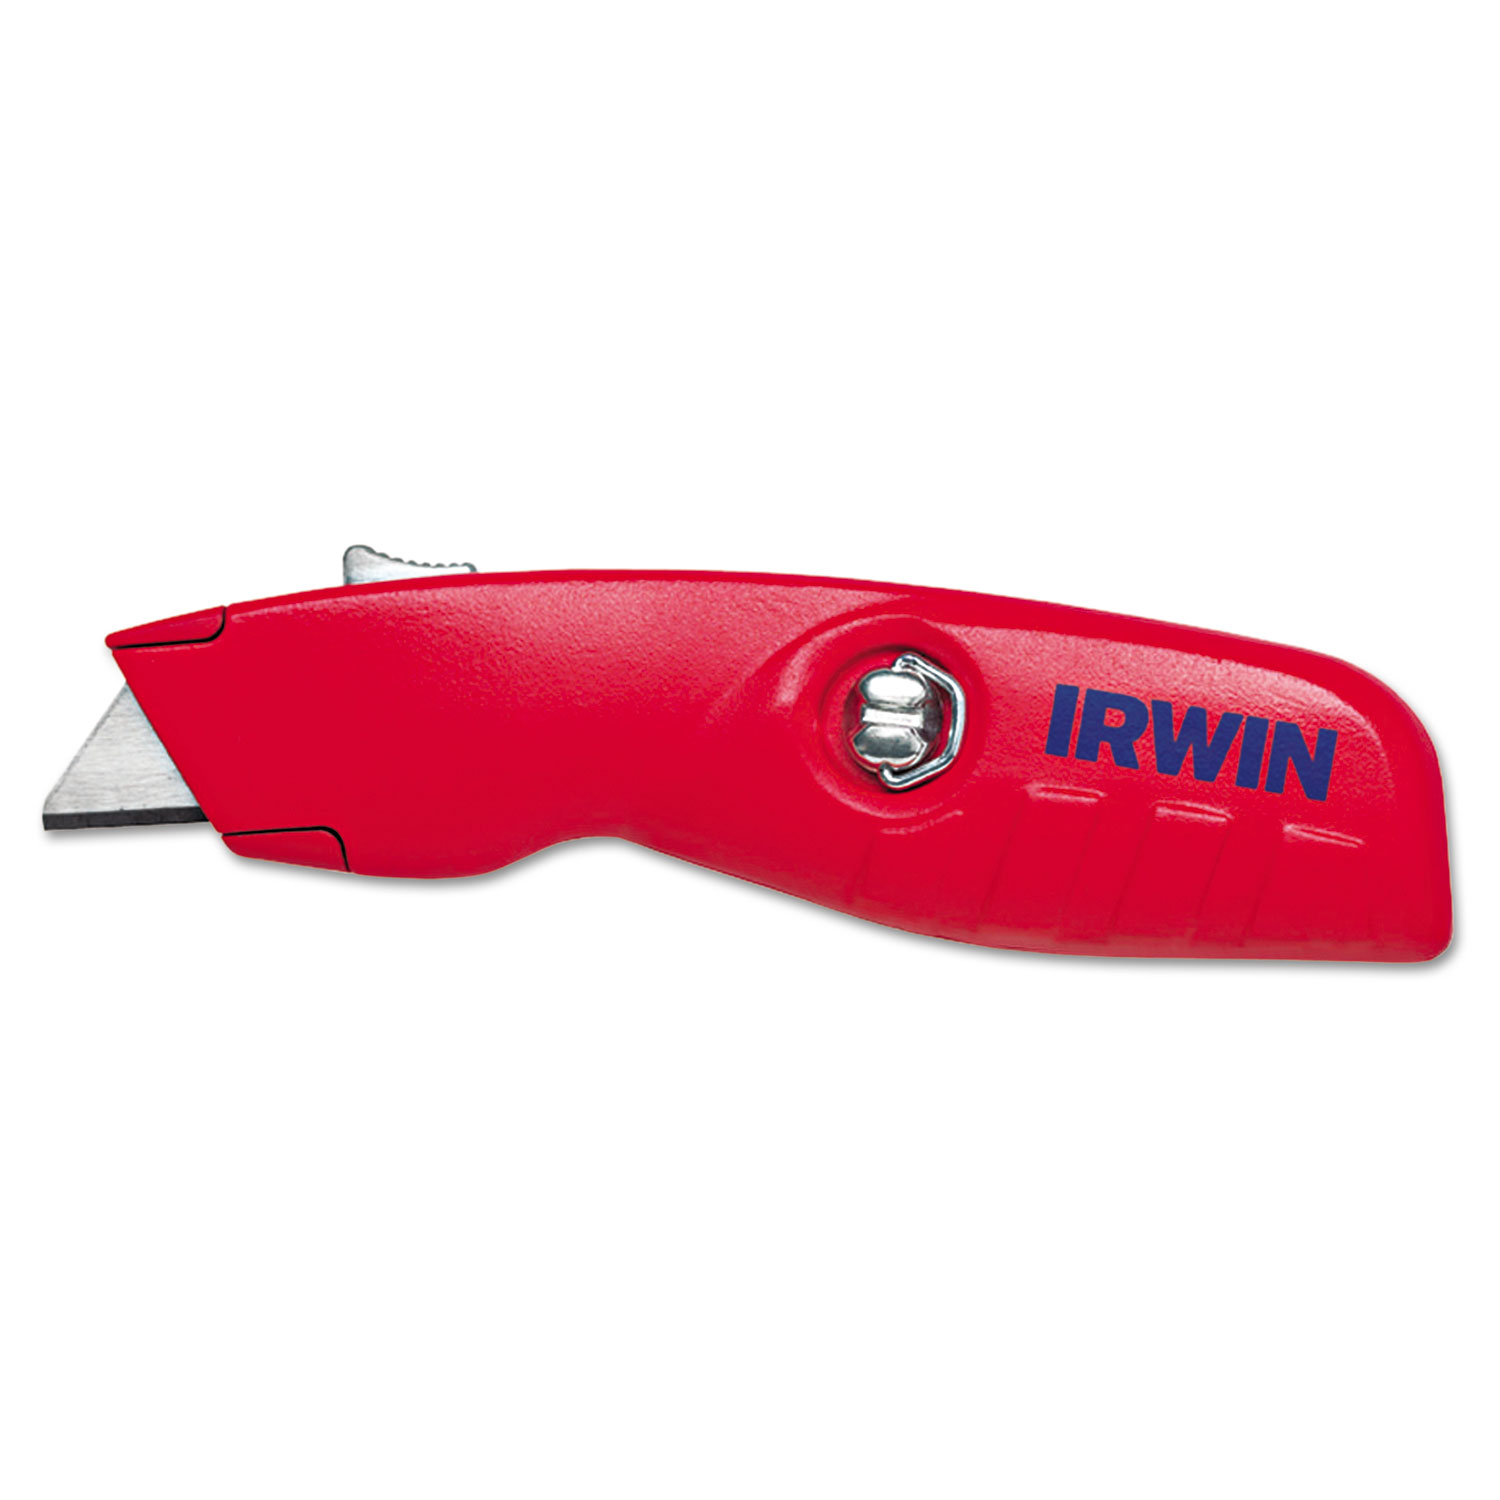  IRWIN 2088600 Self-Retracting Safety Knife, 1 Retractable Blade, Red/Silver (IRW2088600) 